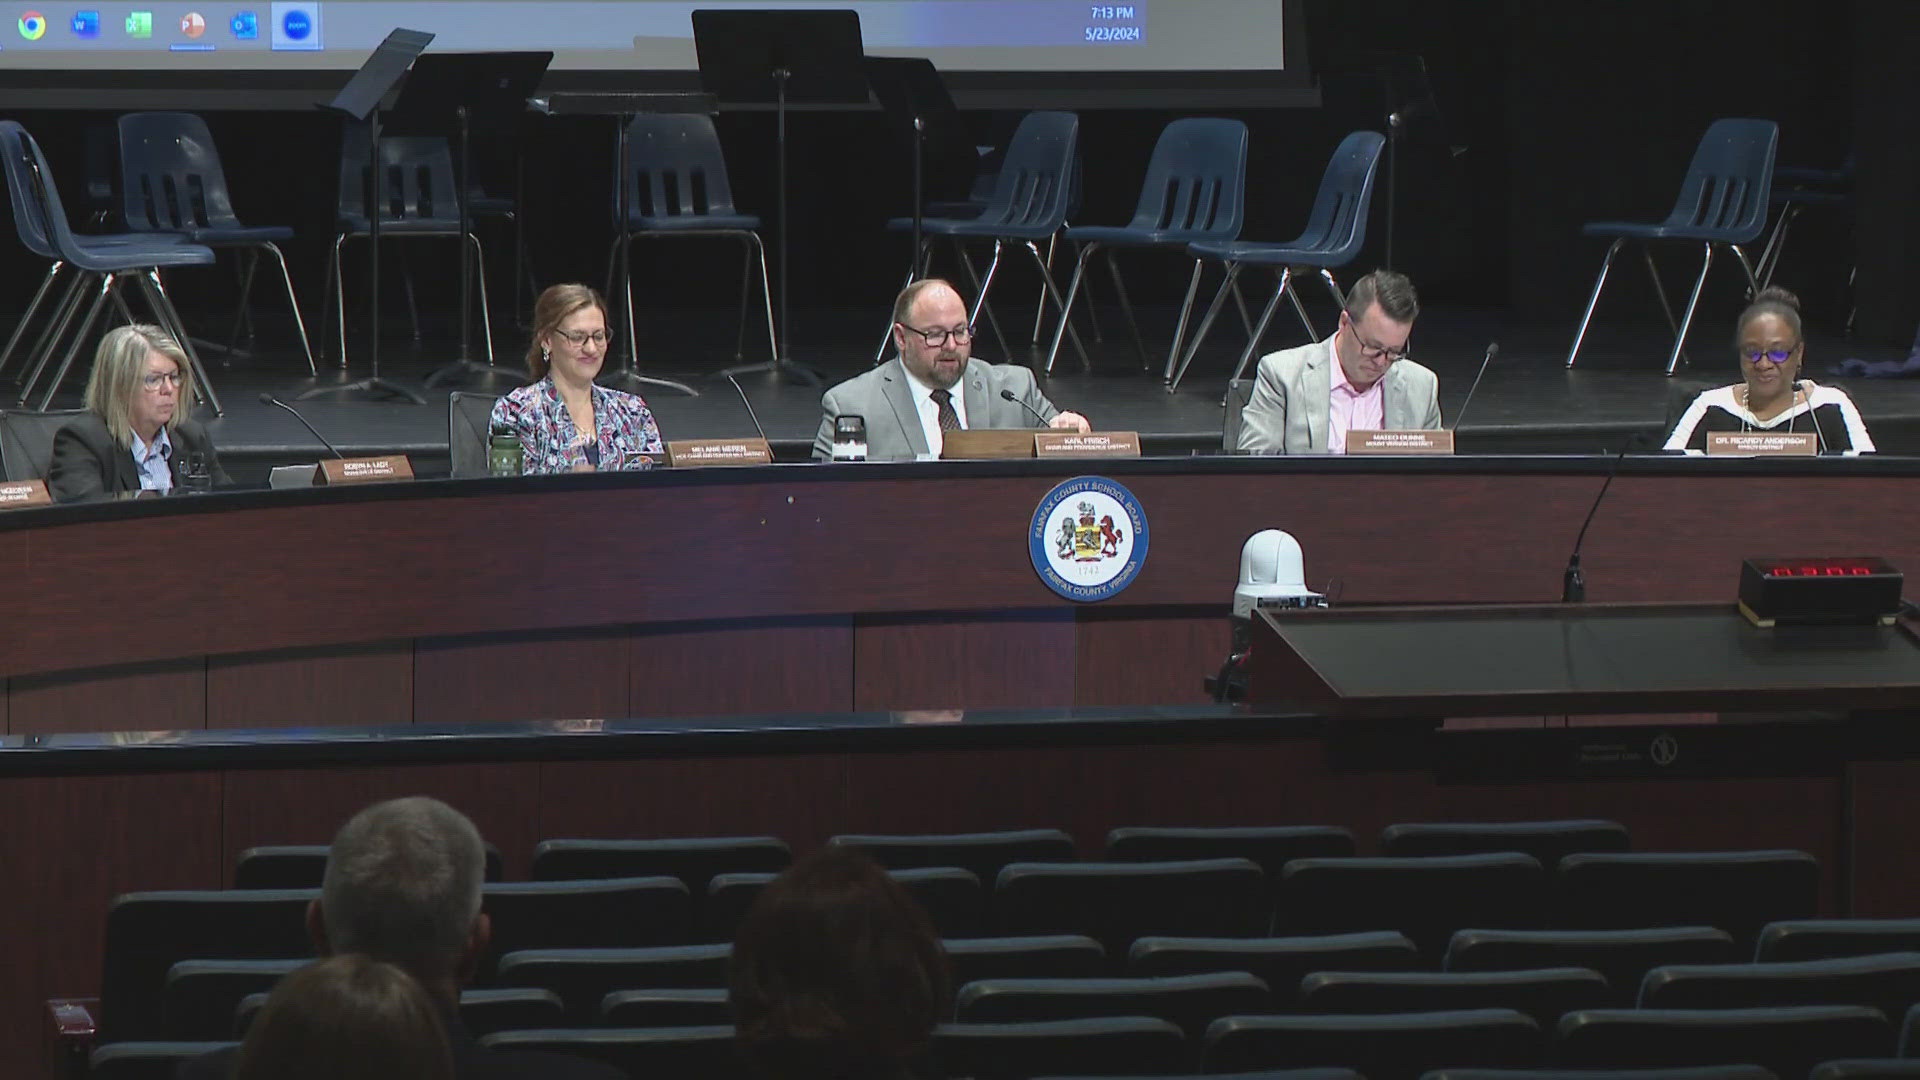 The budget includes a 4% raise for all FCPS employees.